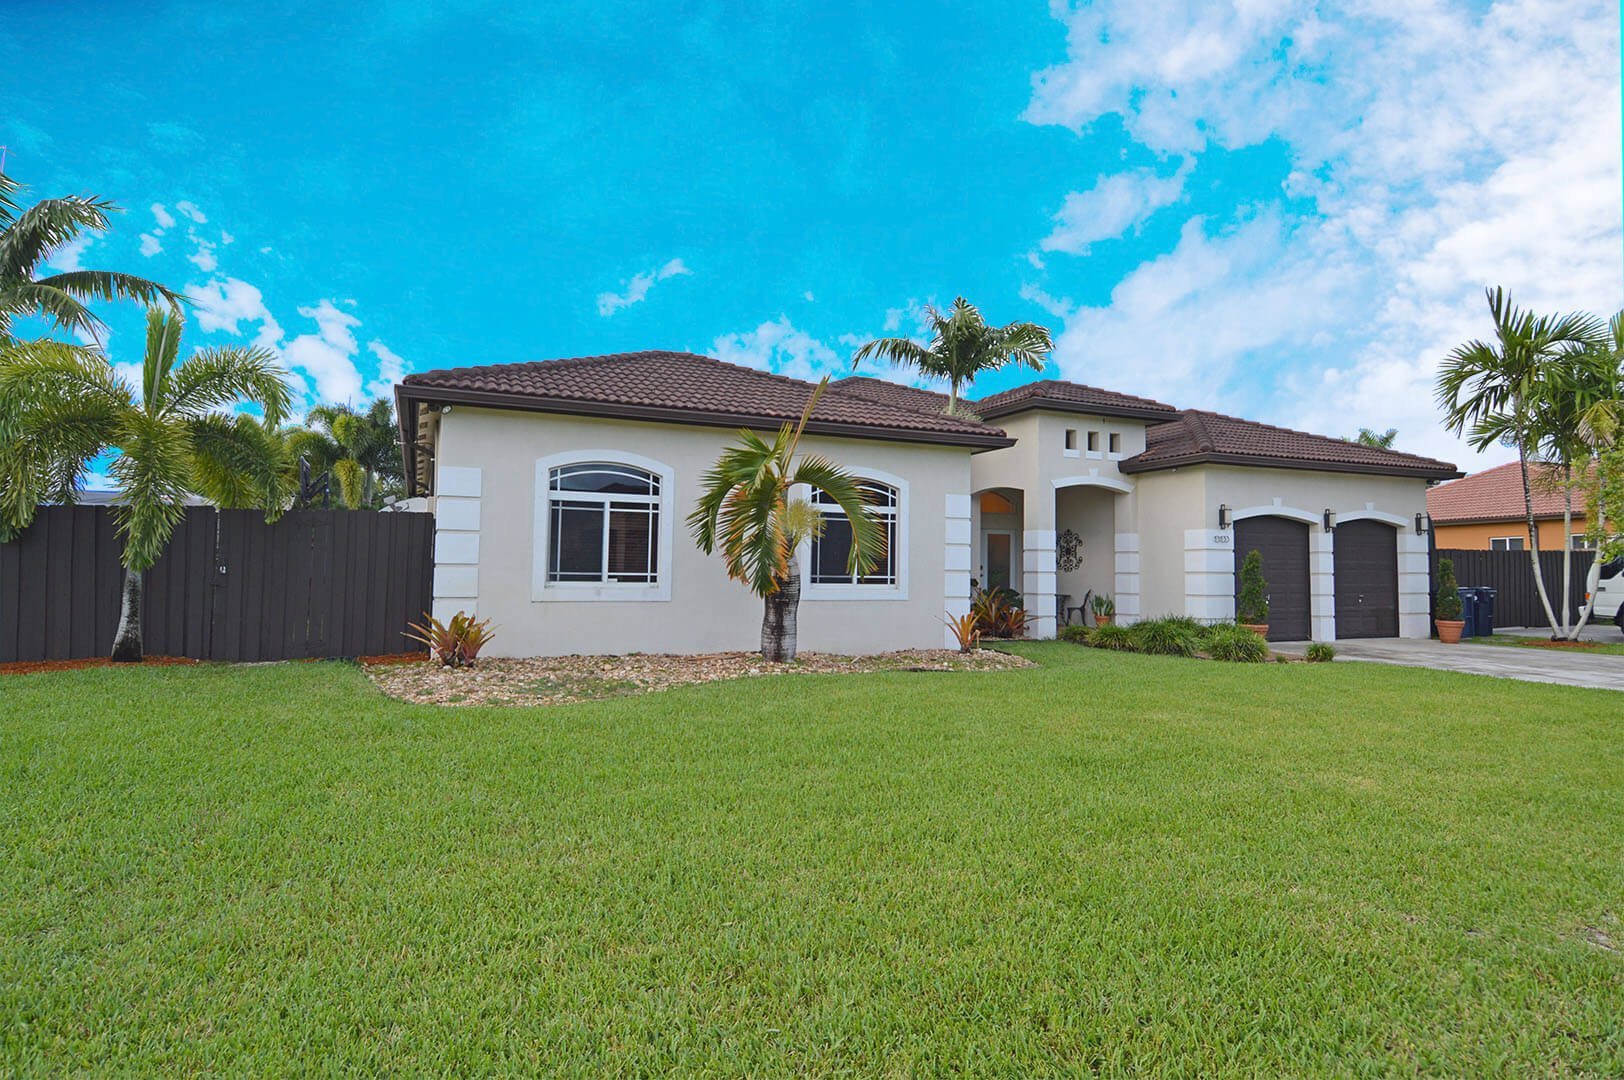 House Front - 13133 SW 212 Ter, Miami, FL 33177 - © Flat Fee Florida Realty